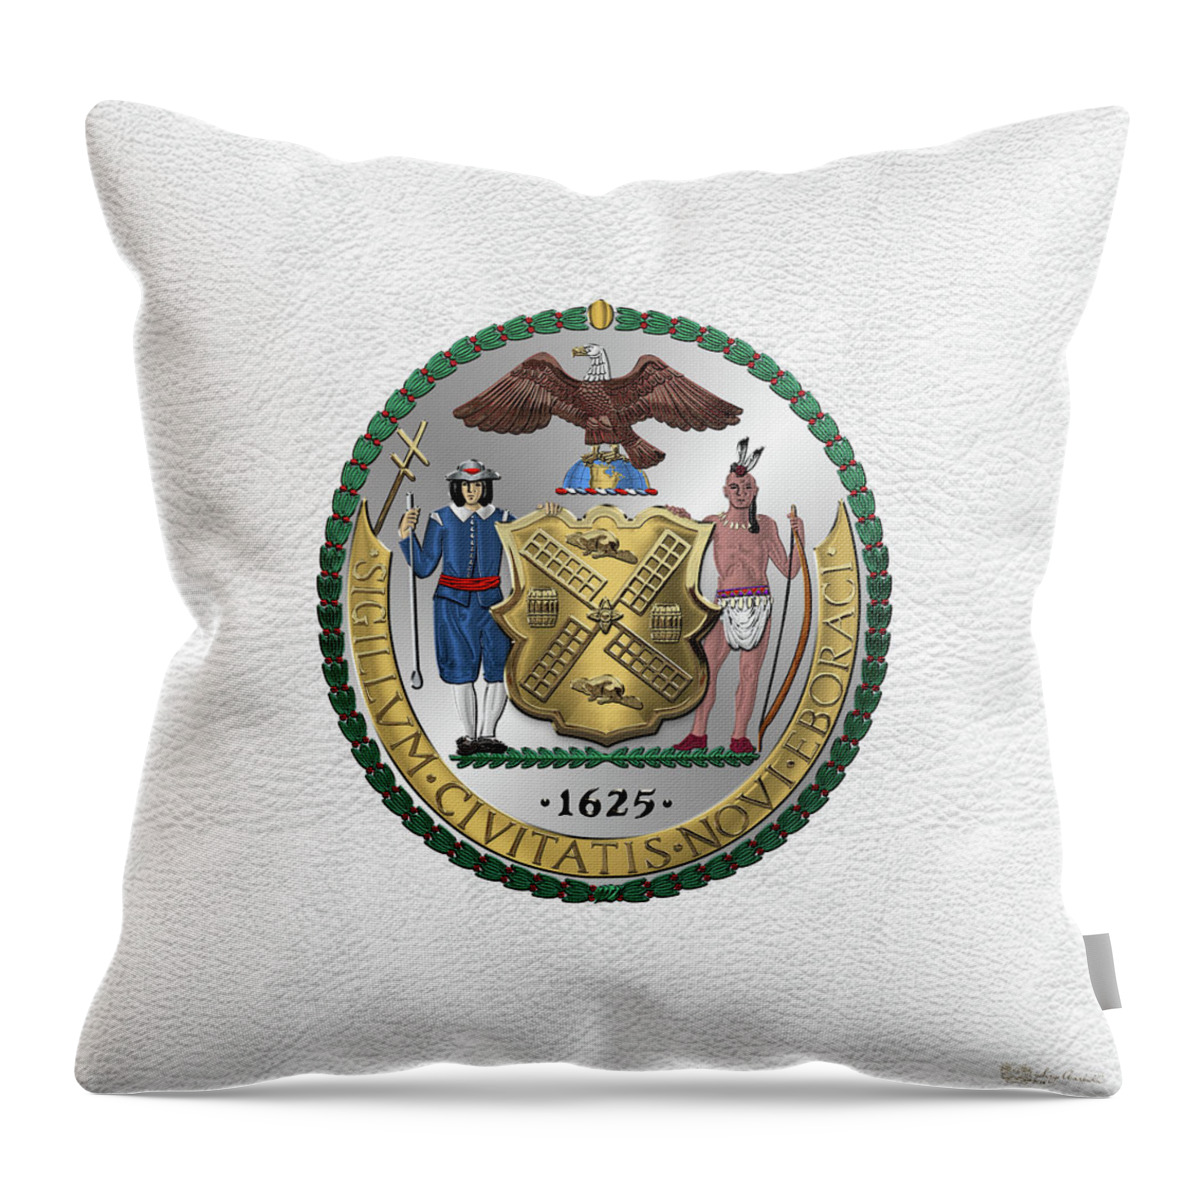 'cities Of The World' Collection By Serge Averbukh Throw Pillow featuring the digital art New York City Coat of Arms - City of New York Seal over White Leather by Serge Averbukh